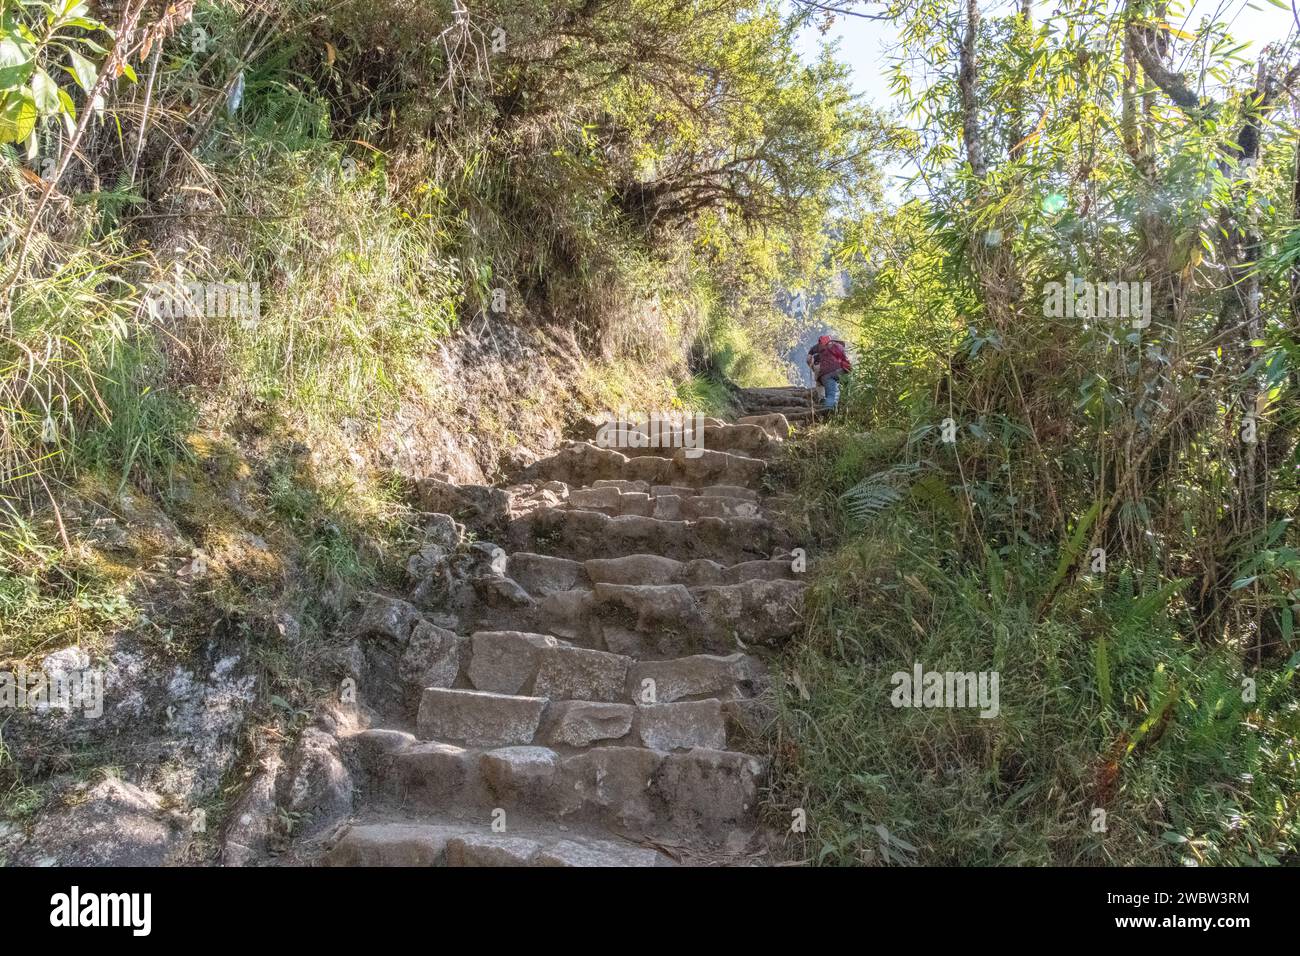 Two tourists walking up stone steps on the path / trail leading up to the top of Huayna Picchu mountain at Machu Picchu in Peru Stock Photo